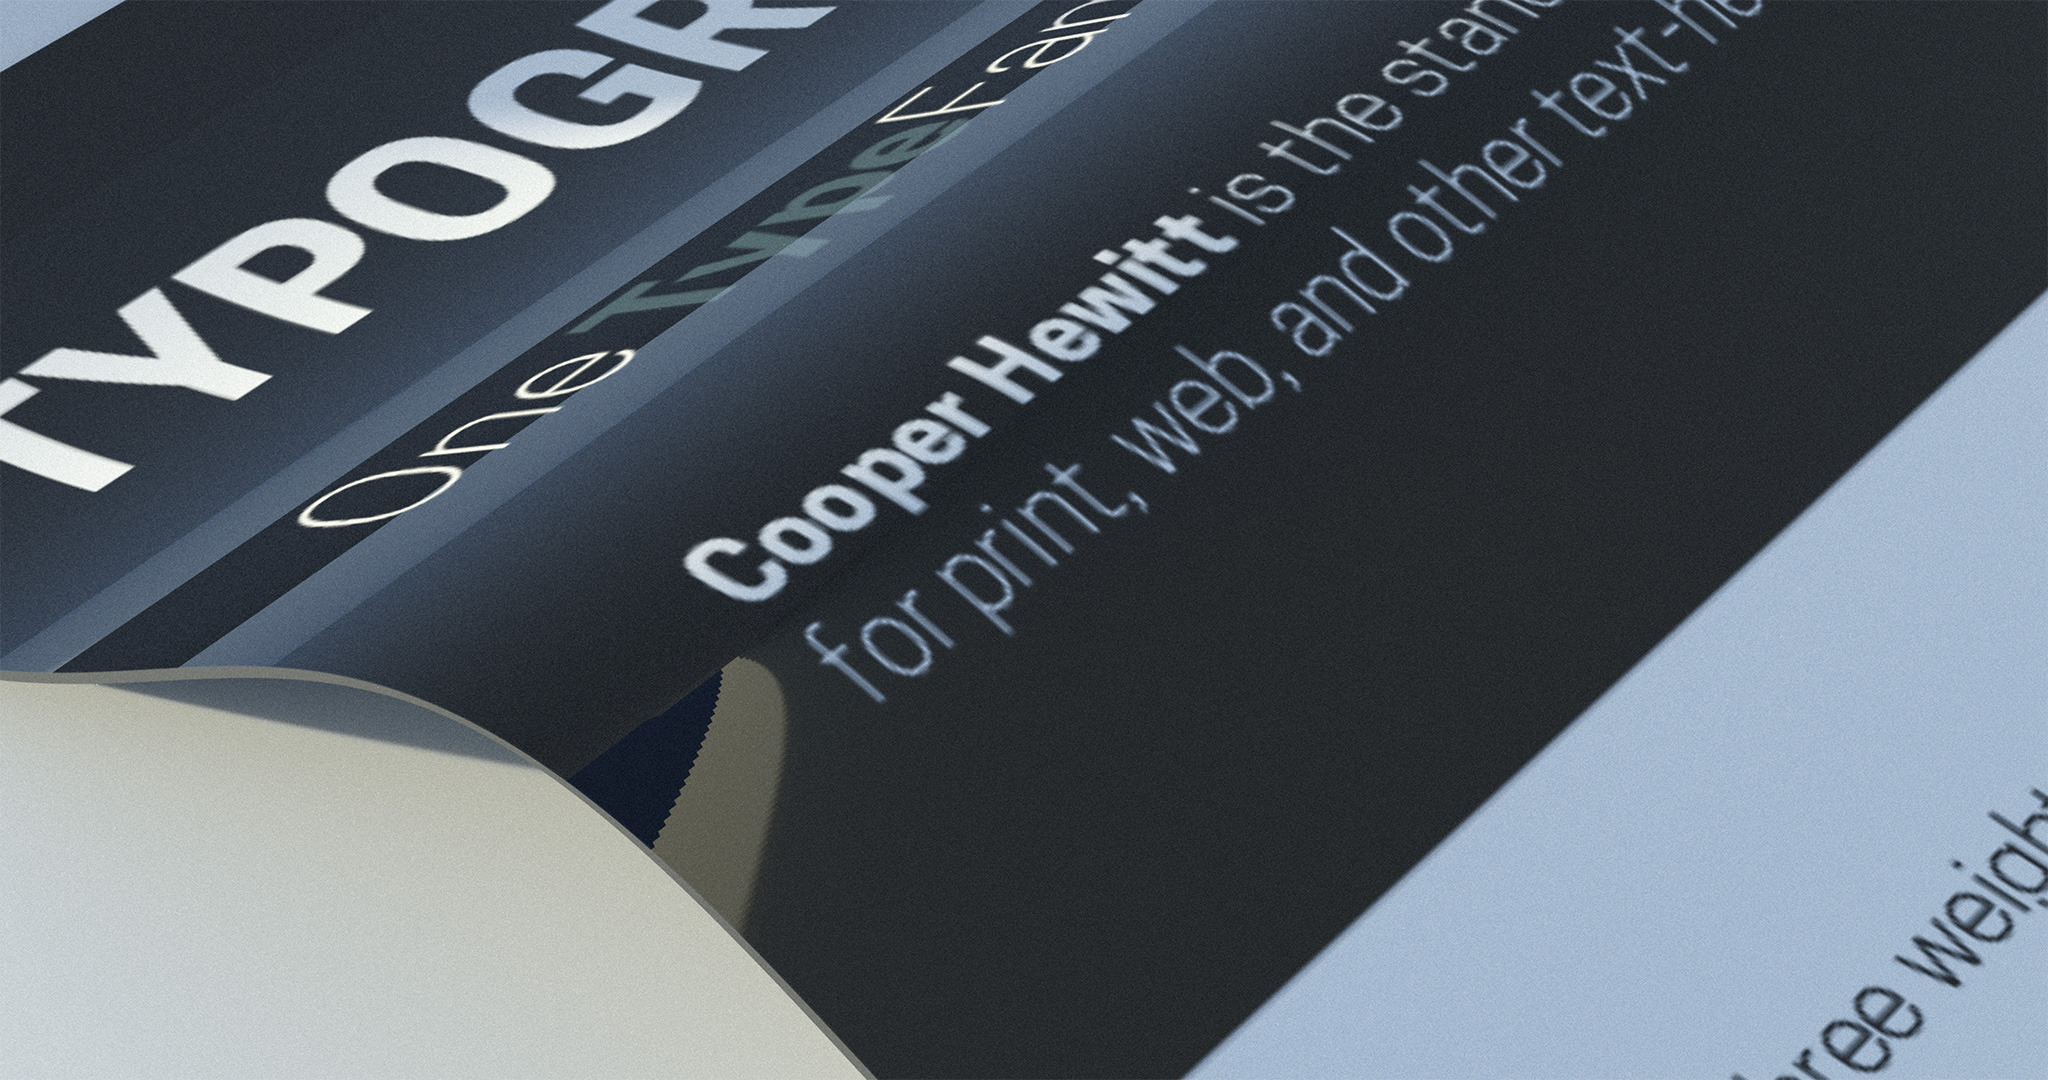 A close-up, 3D render of the Typography section from the brandbook; featuring the name of the typeface: Cooper Hewitt.